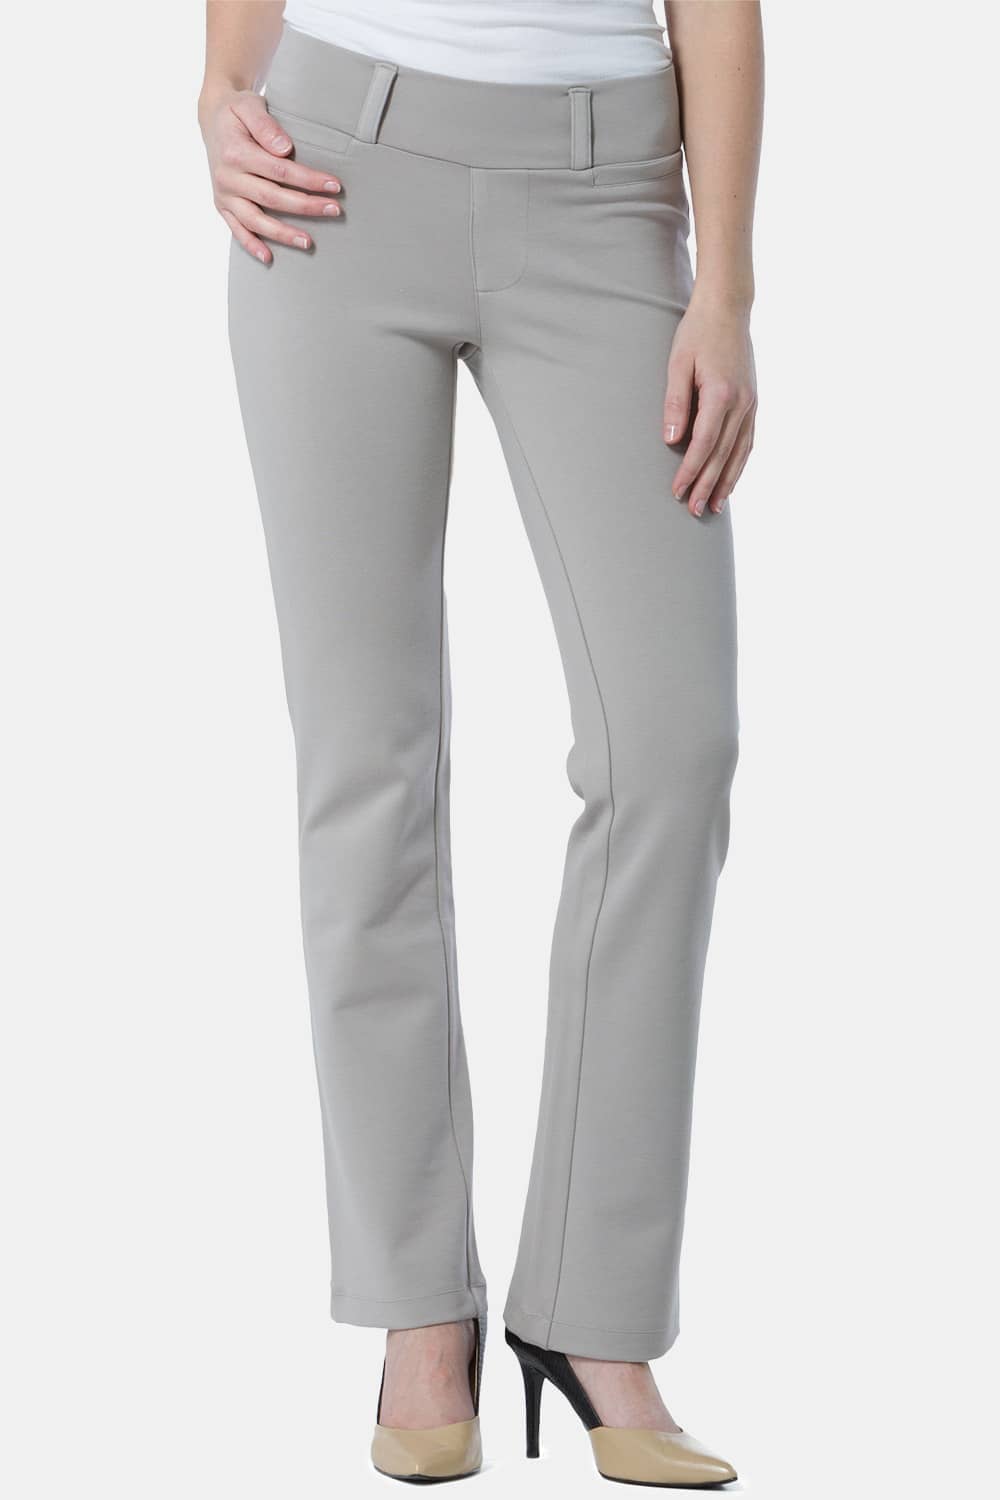 Women's Ponte Knit Pull-On Boot Leg Work Pant - NEW & IMPROVED FIT Womens>Pants Fishers Finery Gray Sky X-Small Petite